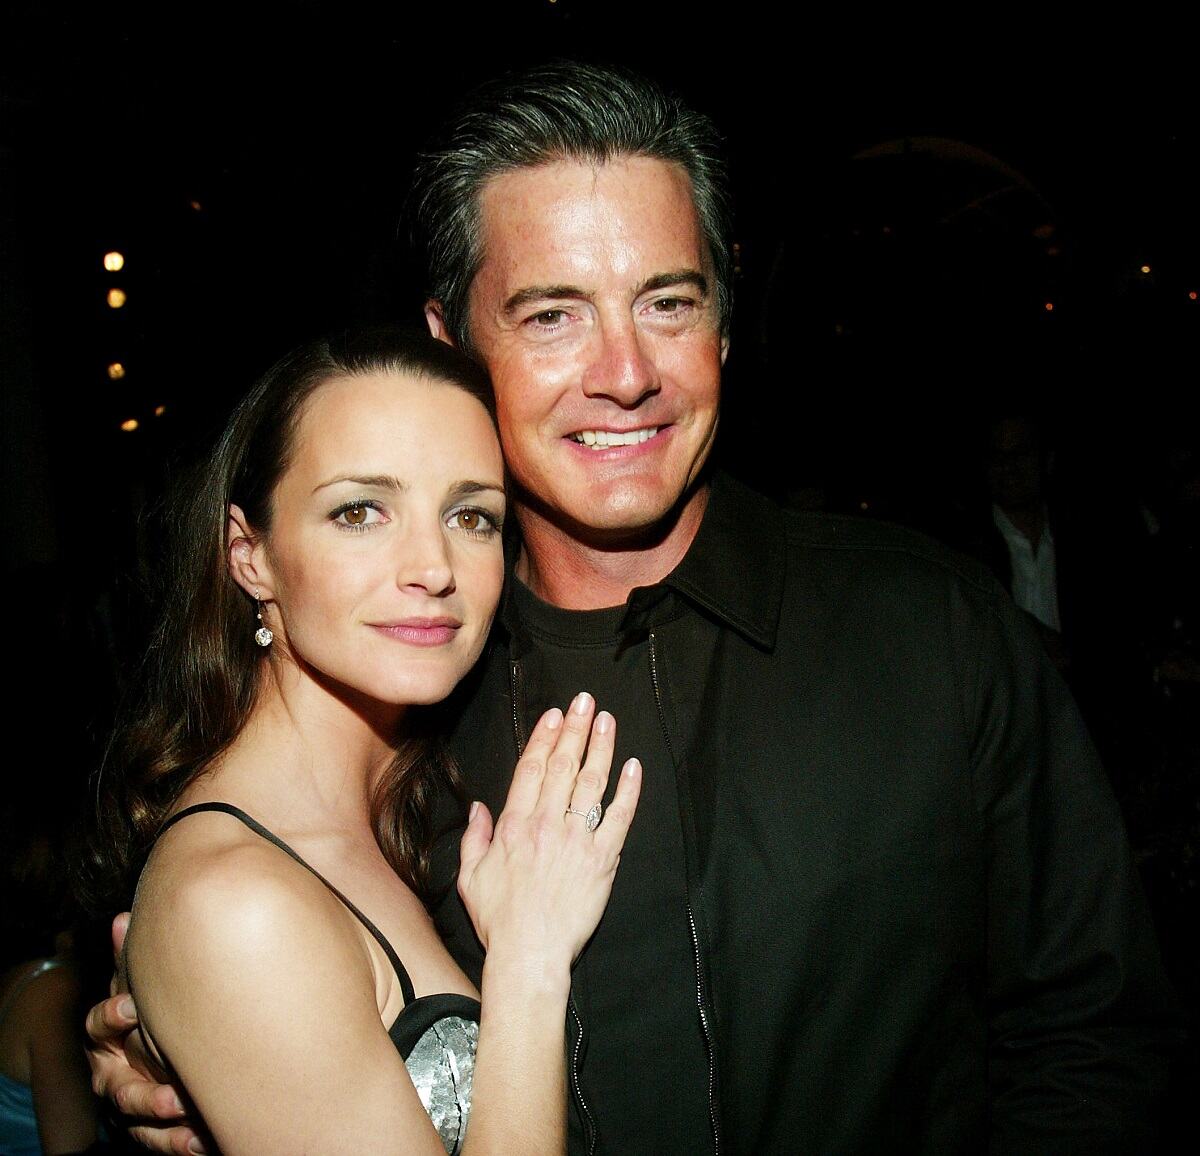 Kristin Davis and Kyle MacLachlan appear together at the Sex and the City season premiere. MacLachlan portrayed Trey MacDougal on 'Sex and the City'